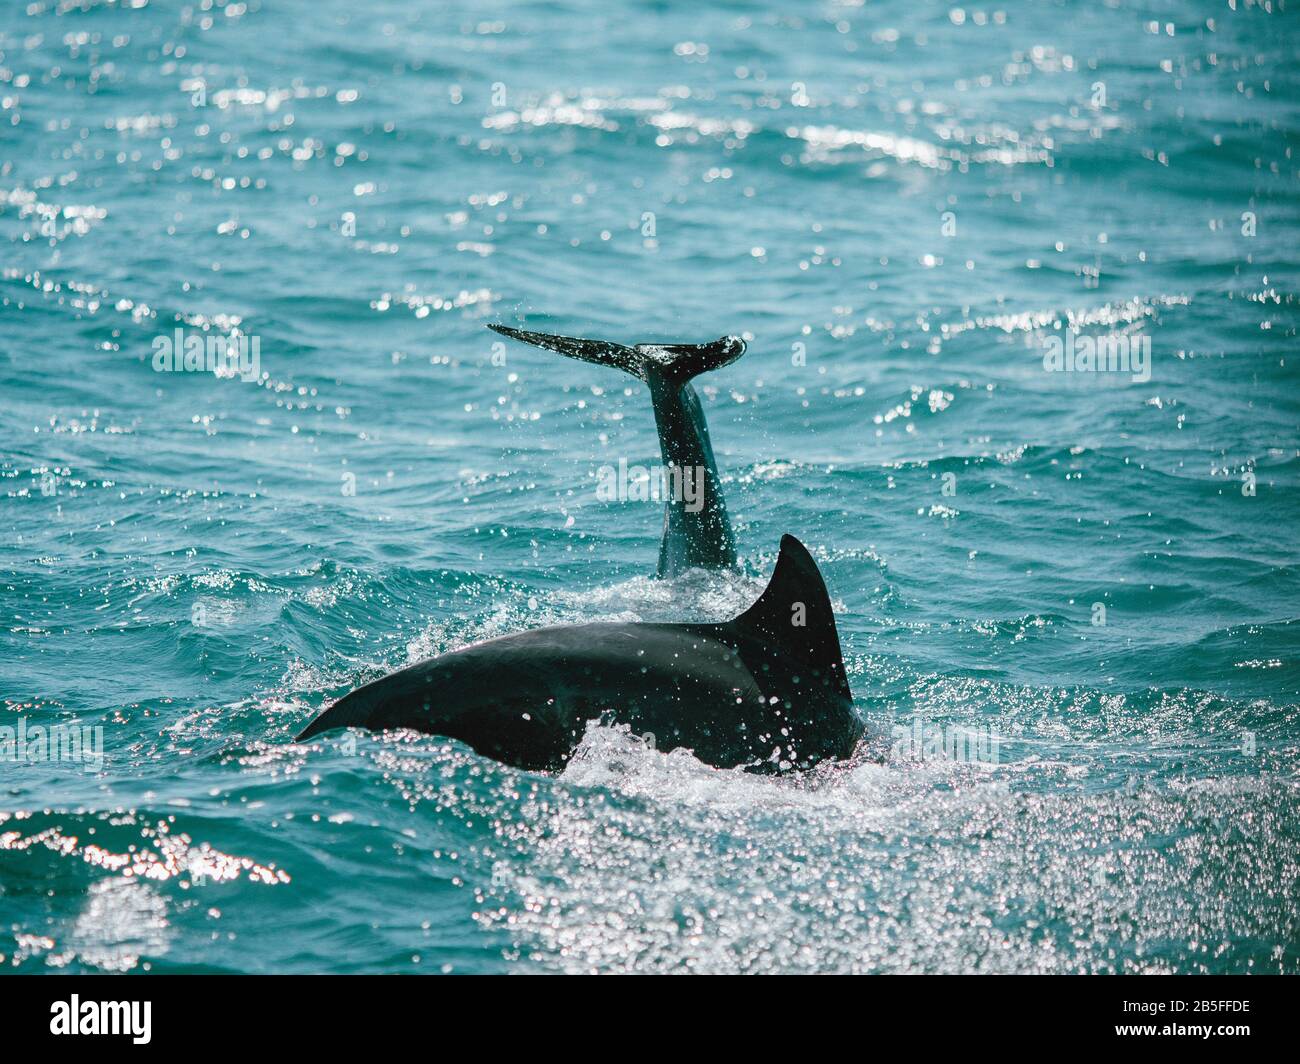 Some wild dolphins in the ocean in Western Australia Stock Photo